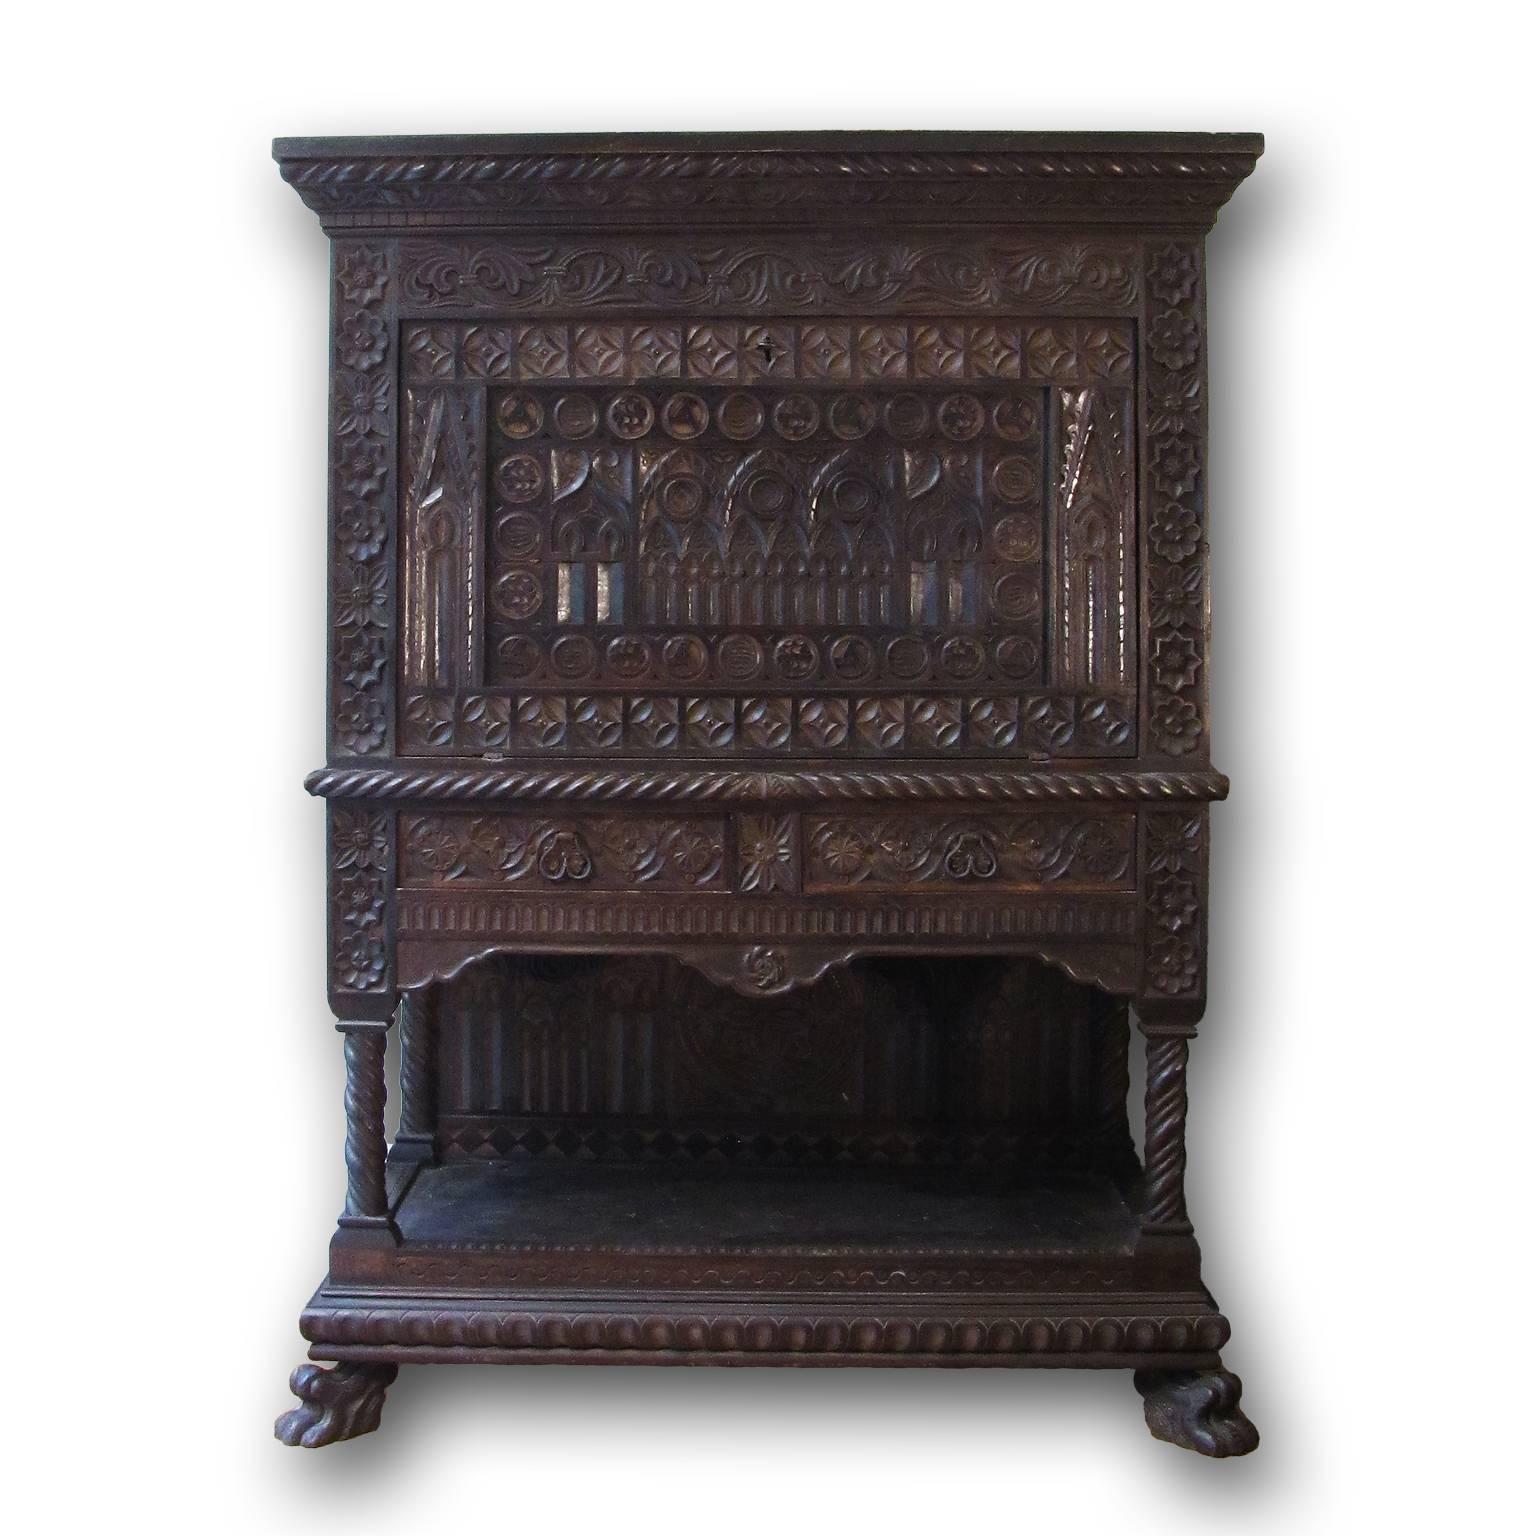 Gothic Revival Italian Mid-19th Century Carved Solid Walnut Wood Stipo, Writing Cabinet For Sale